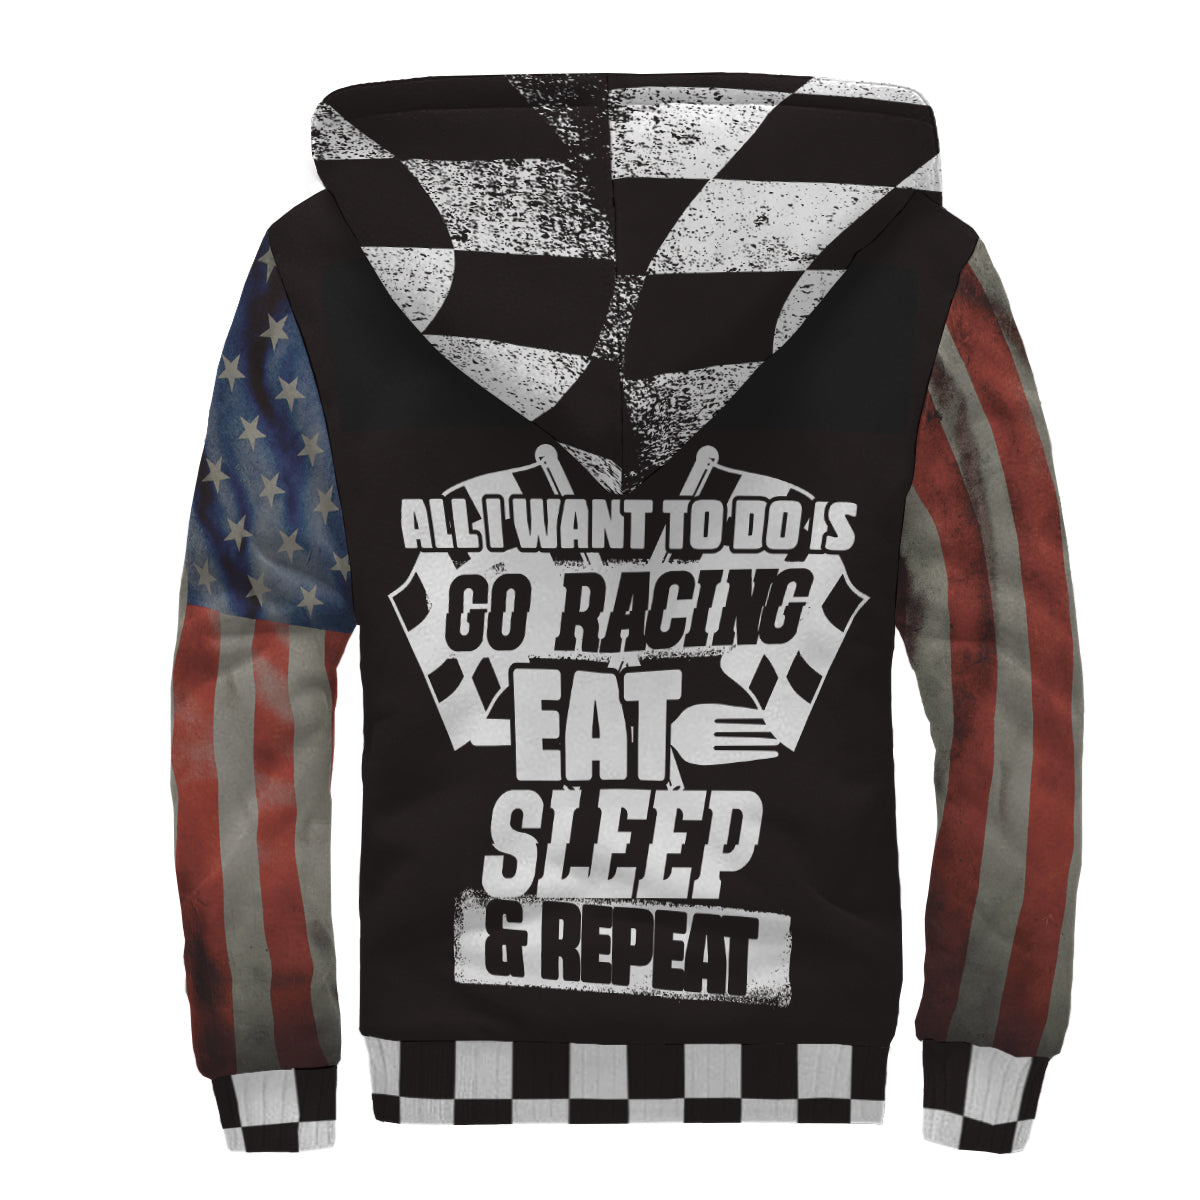 All I Want To Do Is Go Racing Eat sleep and repeat USA Racing Sherpa Jacket